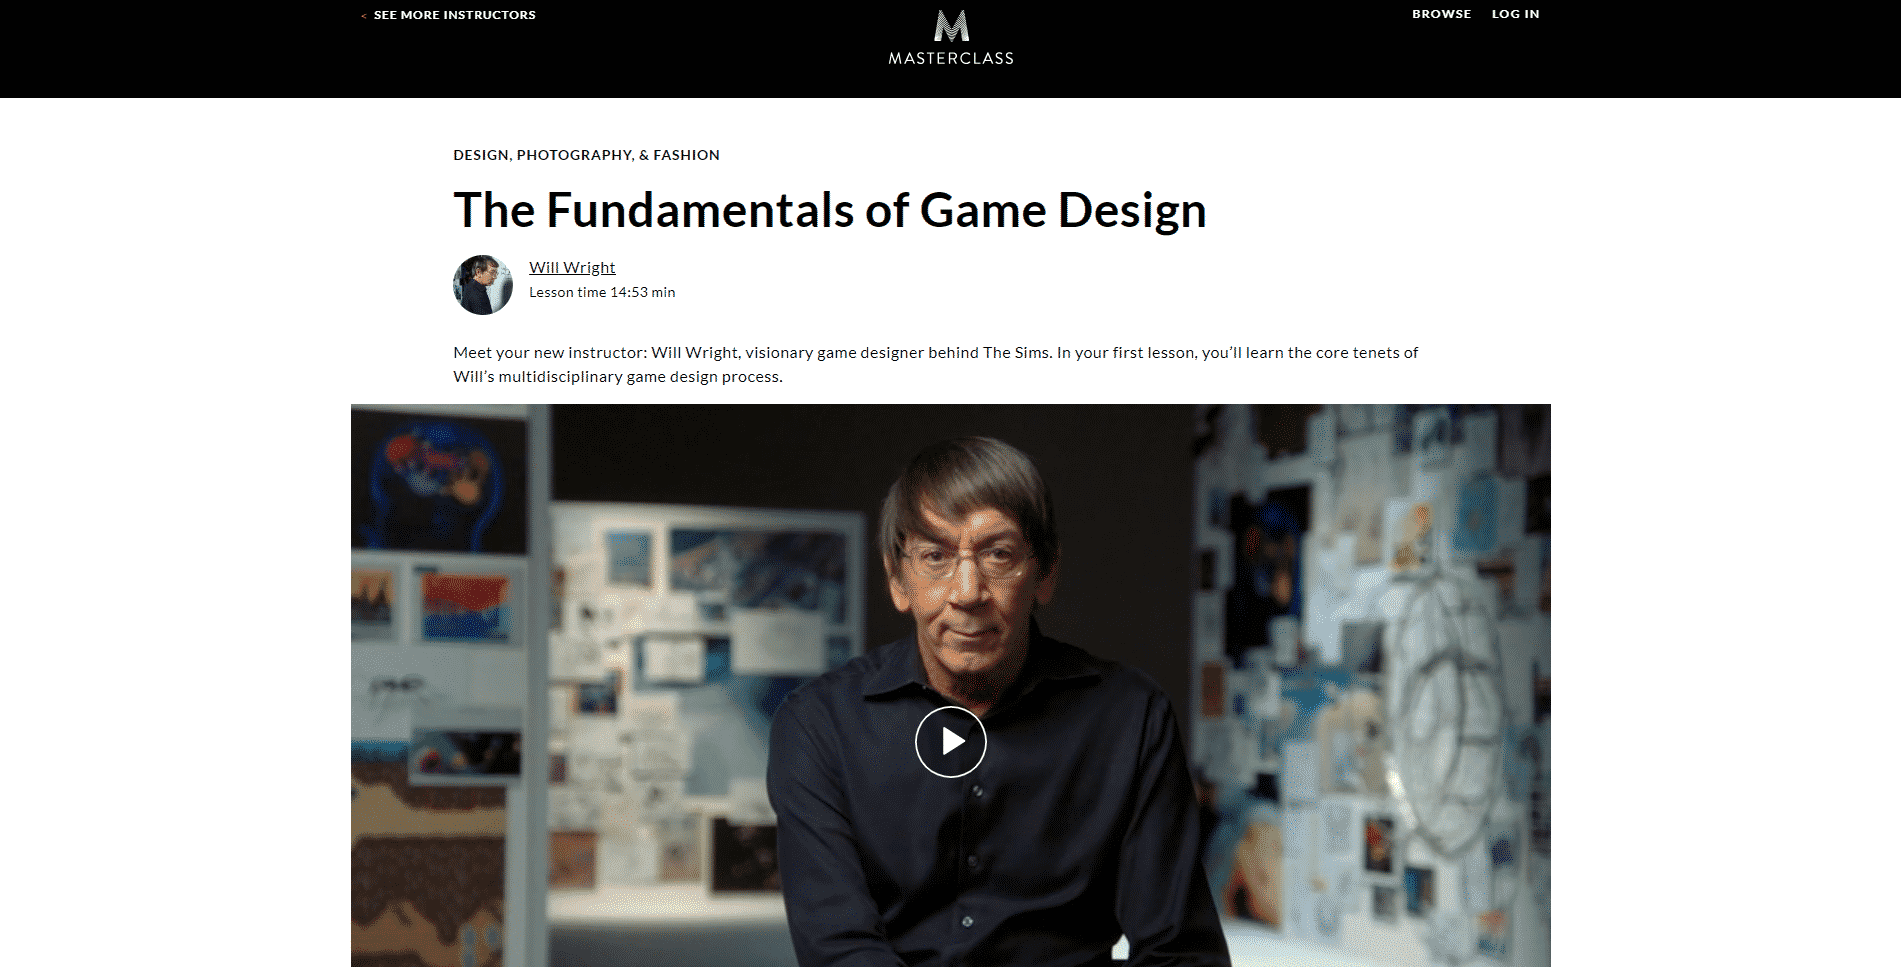 MasterClass Learn Game Design and Theory Lessons Online